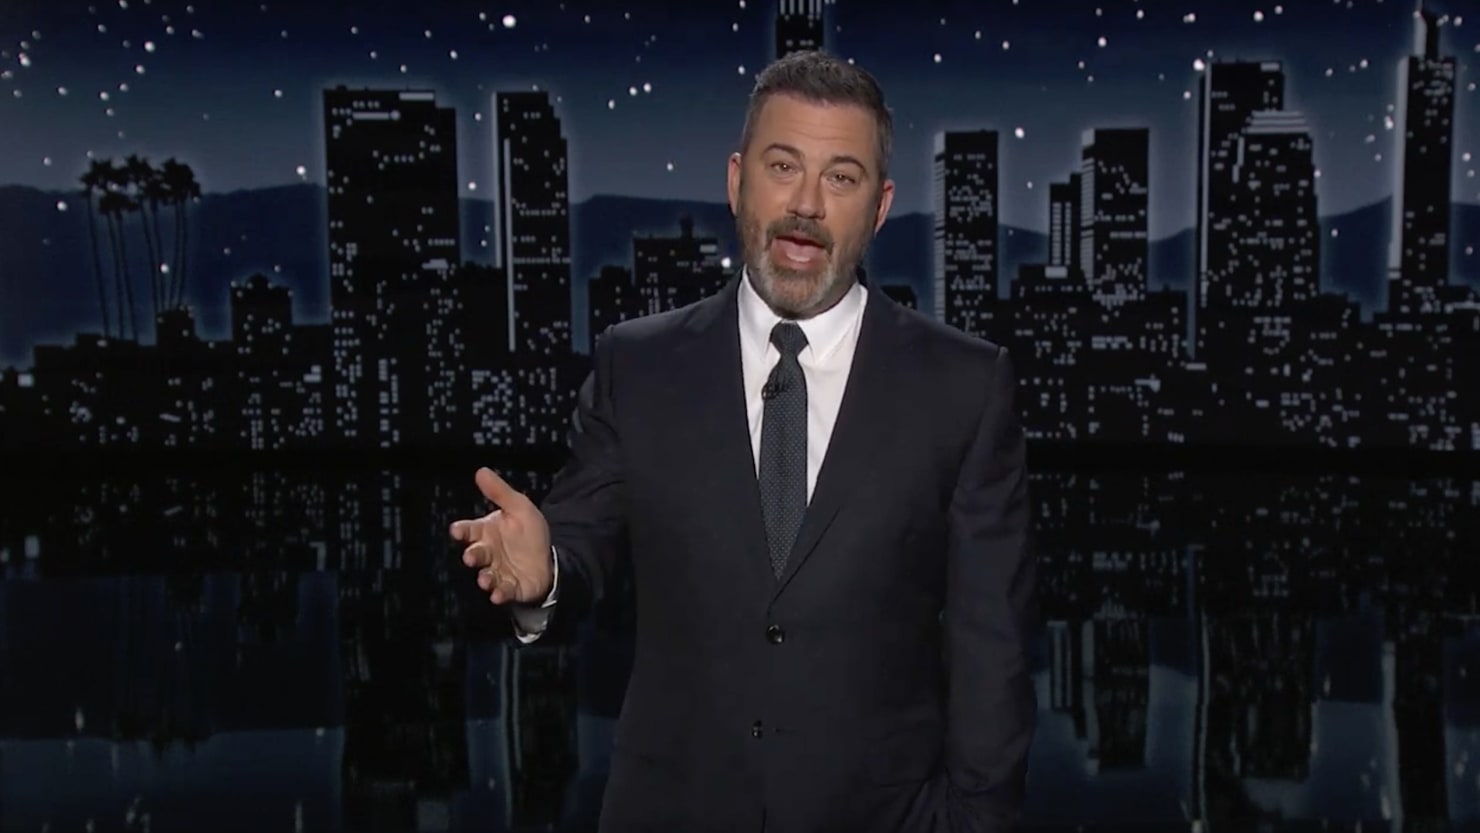 Jimmy Kimmel Mocks Trump’s Penis for Going After Late-Night Hosts